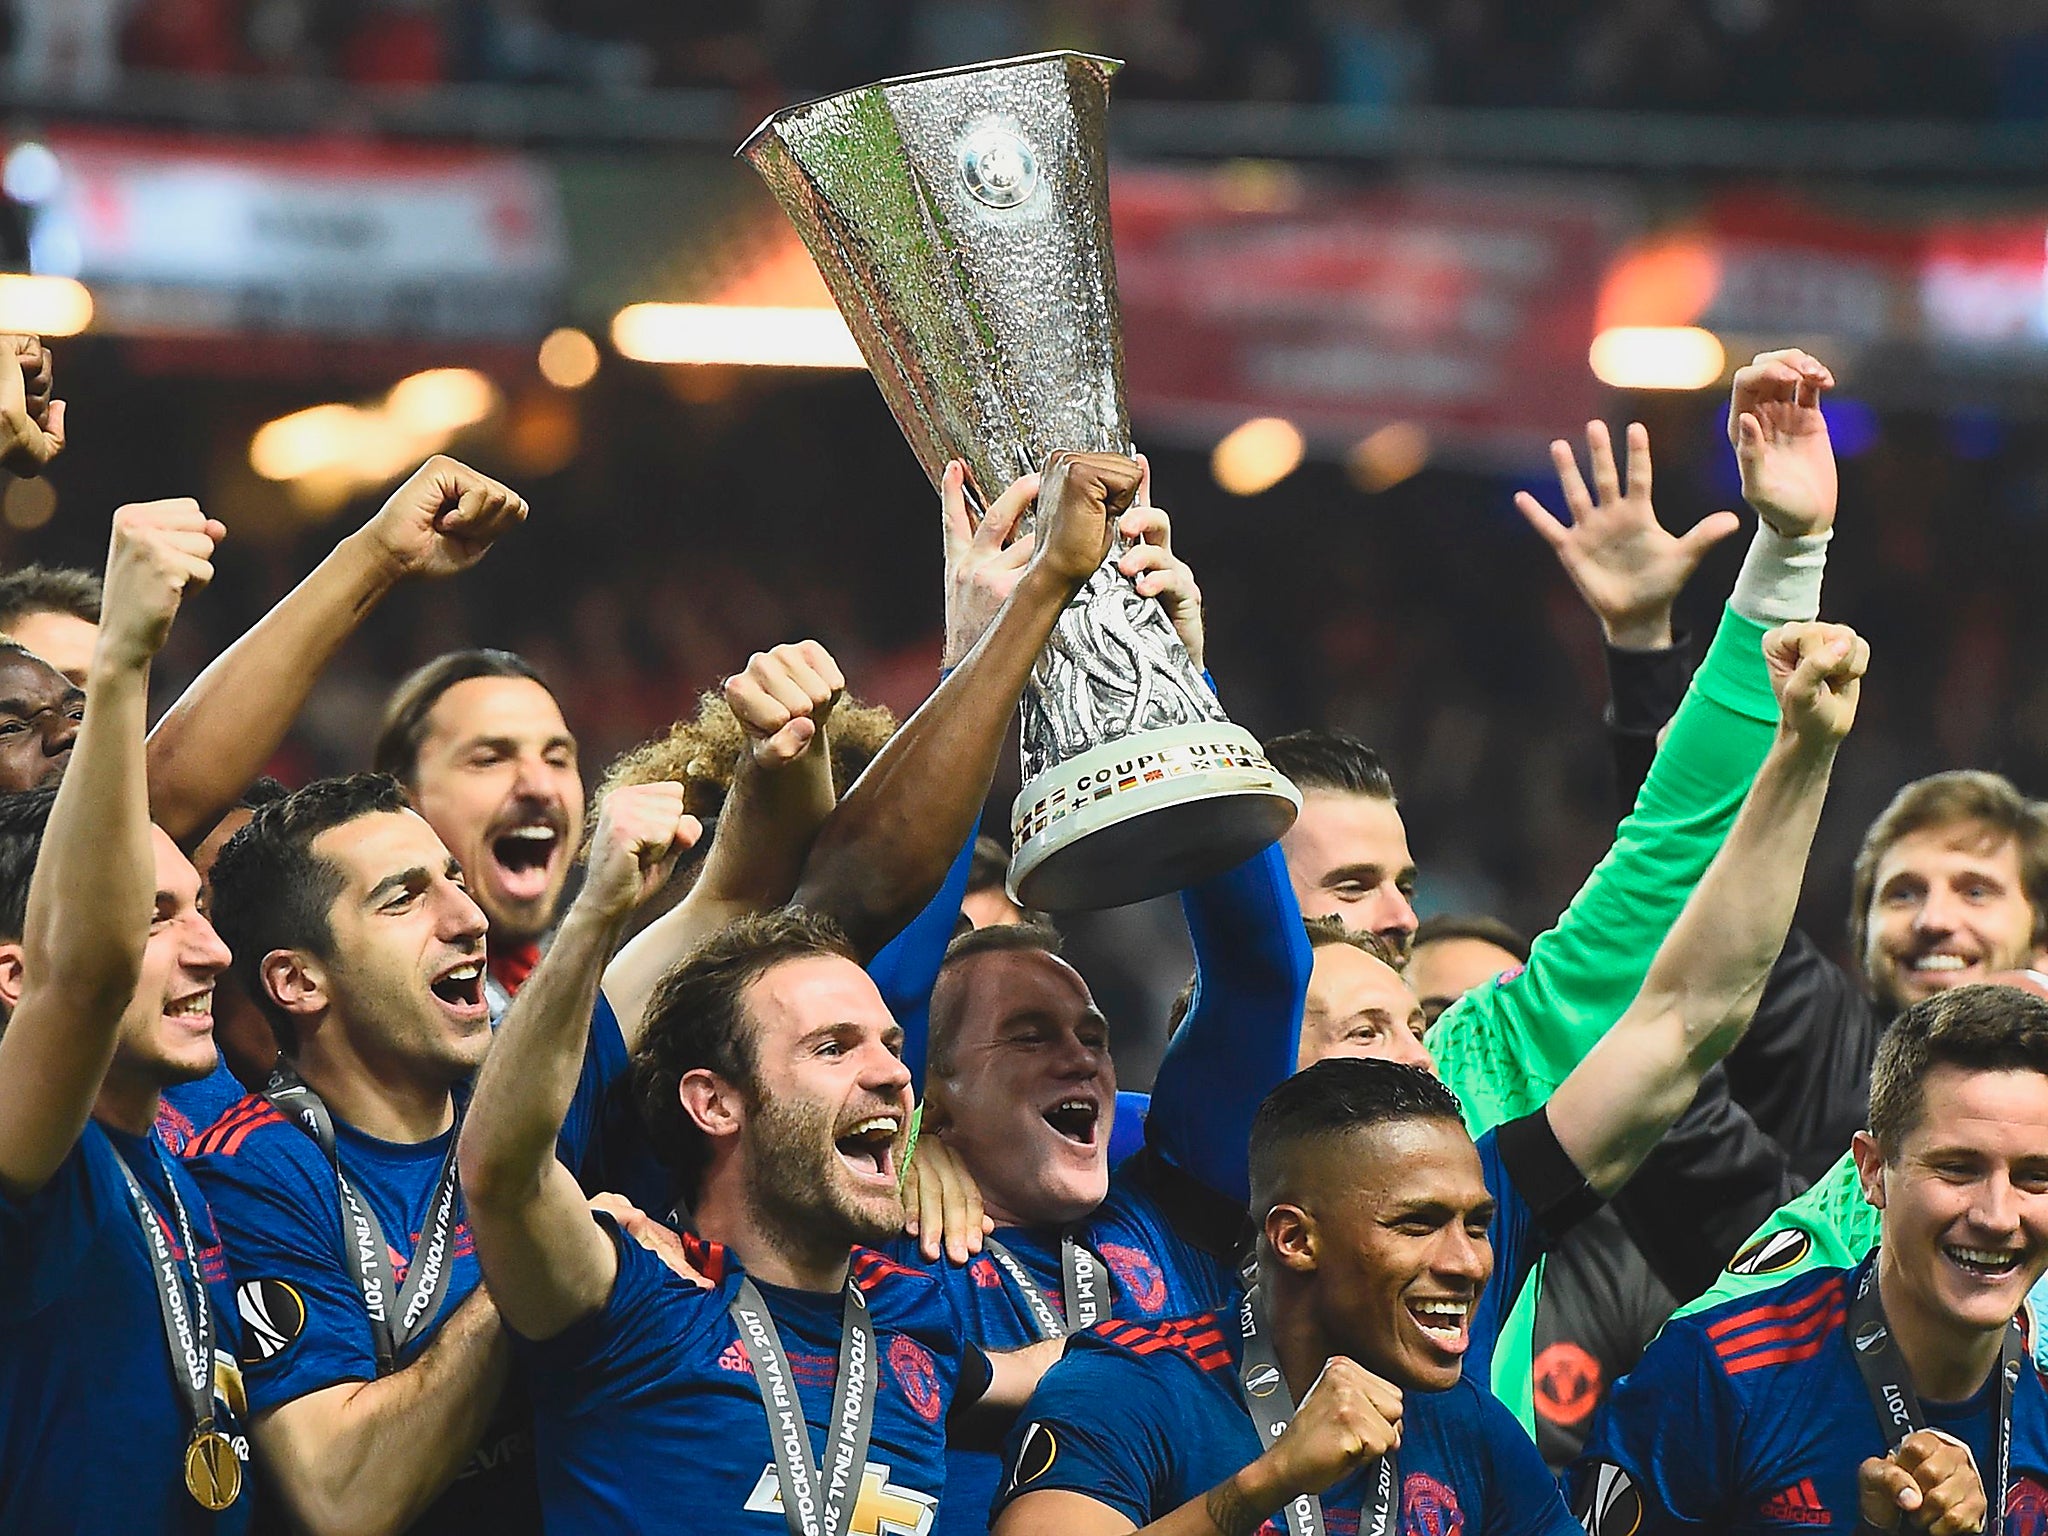 Manchester United's players celebrate with the trophy after winning the UEFA Europa League final